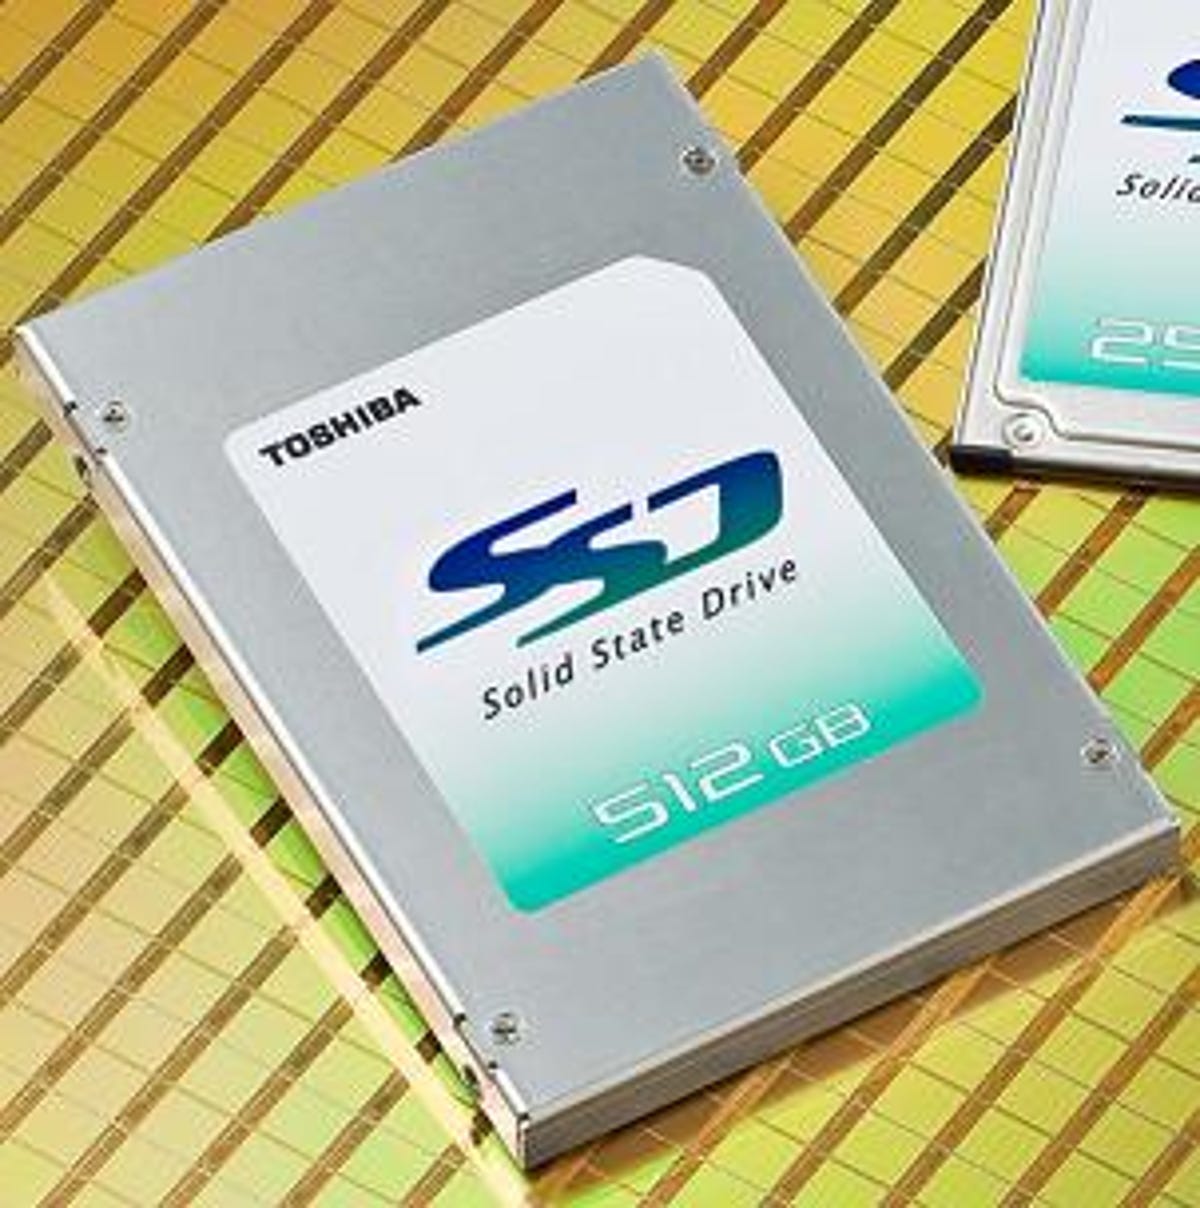 Toshiba 512GB solid-state drive rivals hard disks in capacity